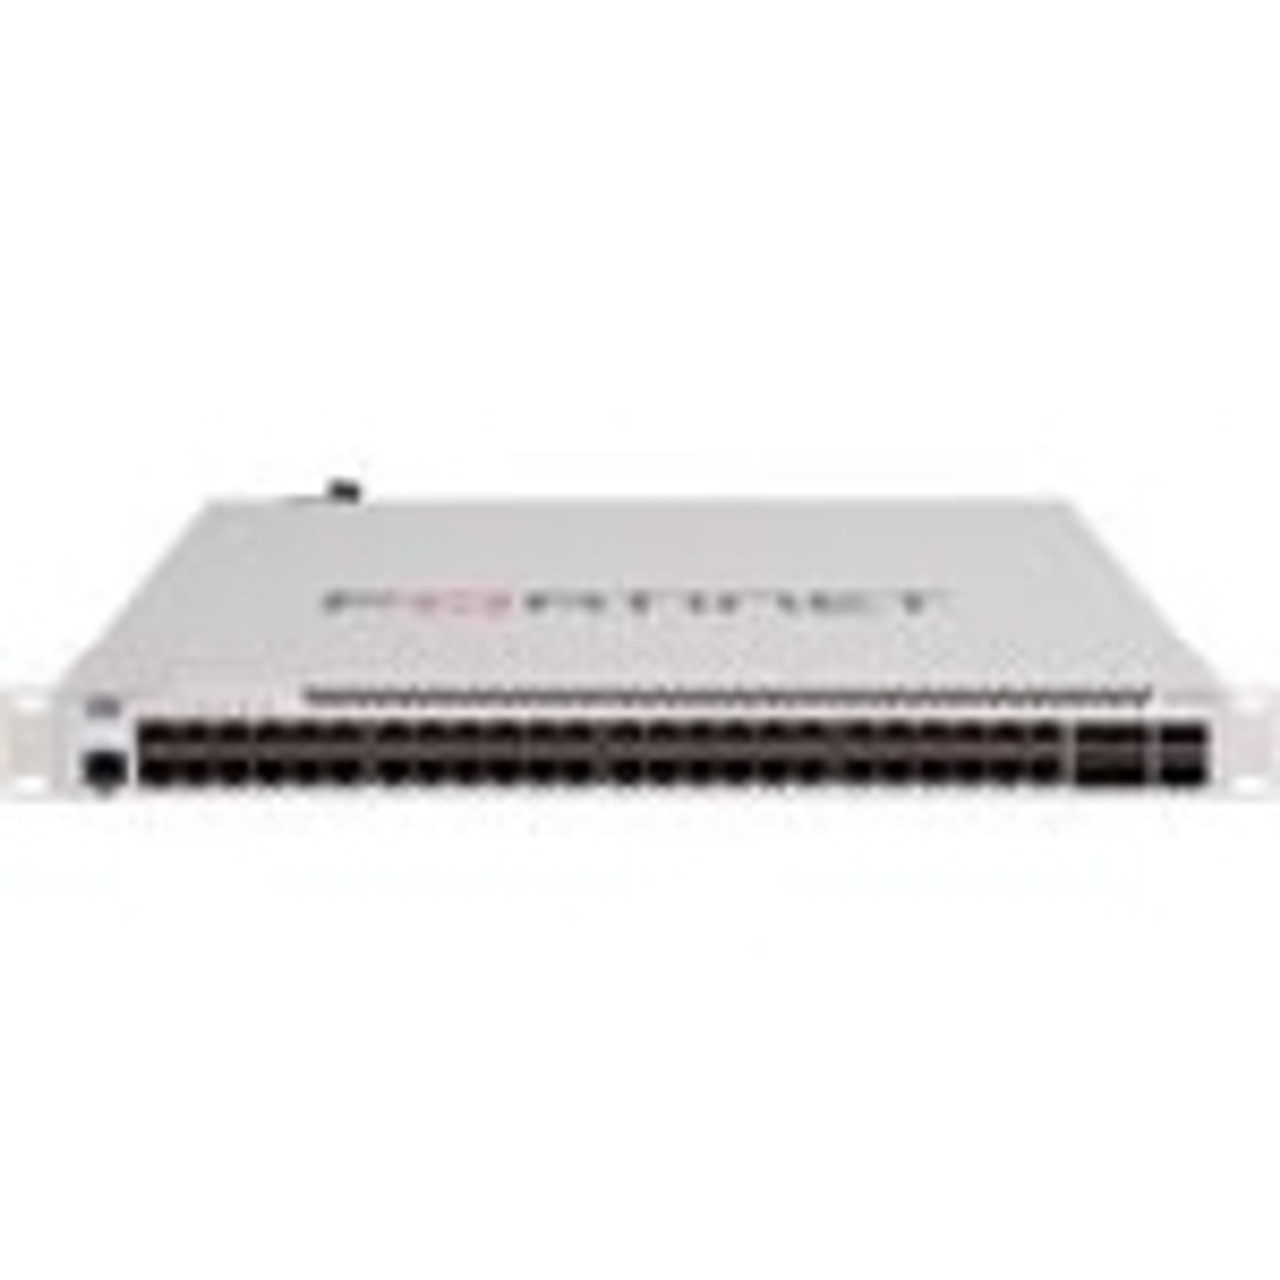 FS-548D-FPOE Fortinet FortiSwitch 548D-FPOE 48-Ports RJ-45 Gigabit Ethernet Layer 2 PoE+ Switch with 4x 10Gbps SFP+ Ports and 2x 40Gbps QSFP+ Ports (R